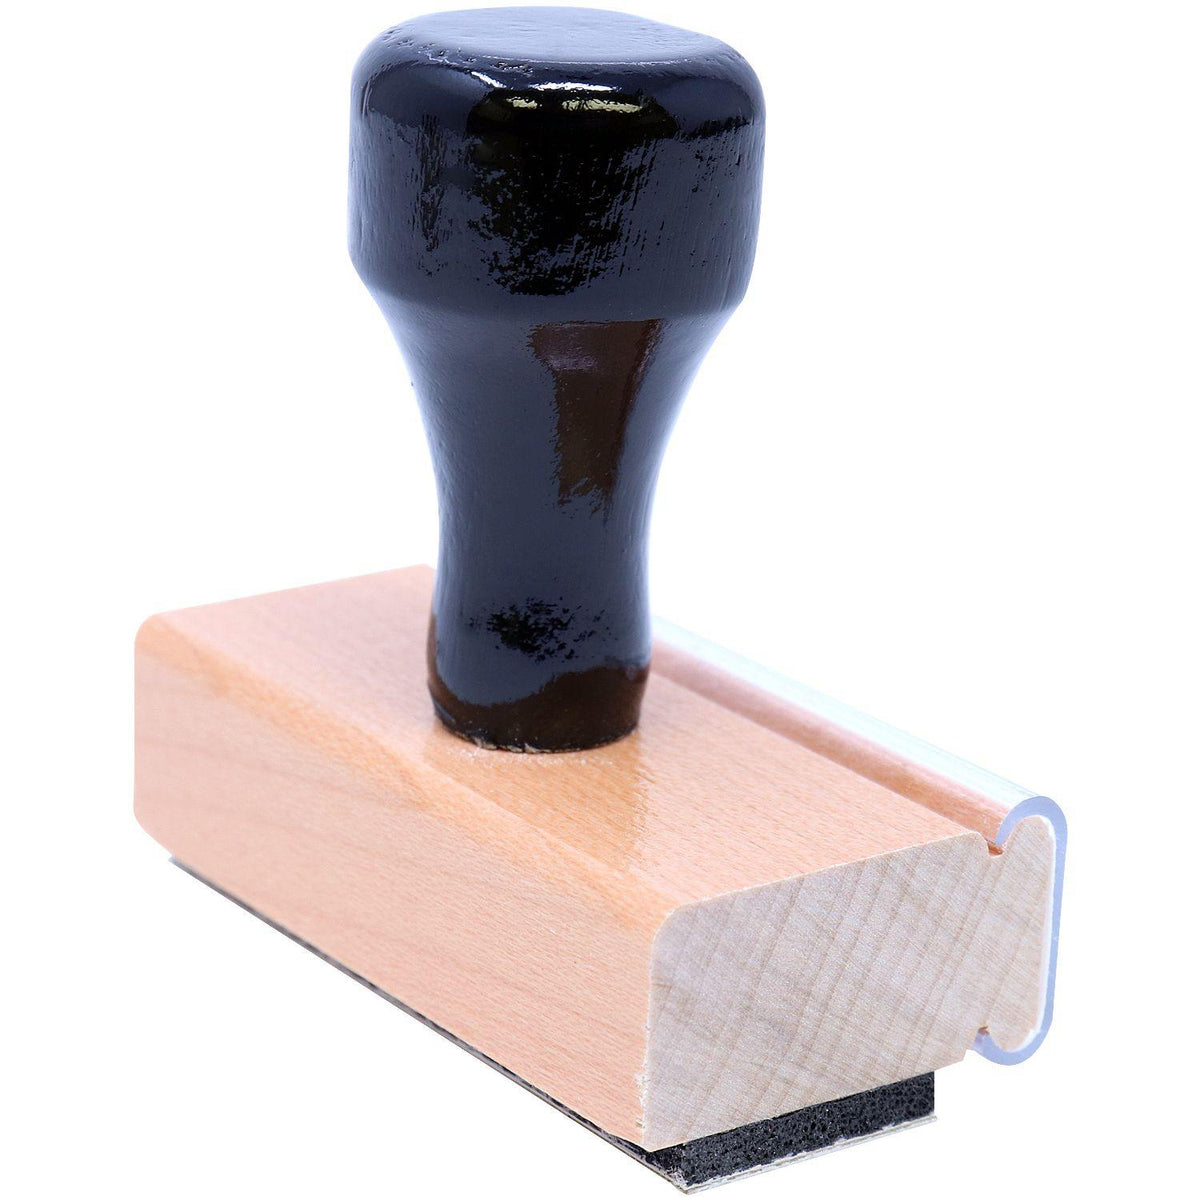 Large Storage Rubber Stamp - Engineer Seal Stamps - Brand_Acorn, Impression Size_Large, Stamp Type_Regular Stamp, Type of Use_Office